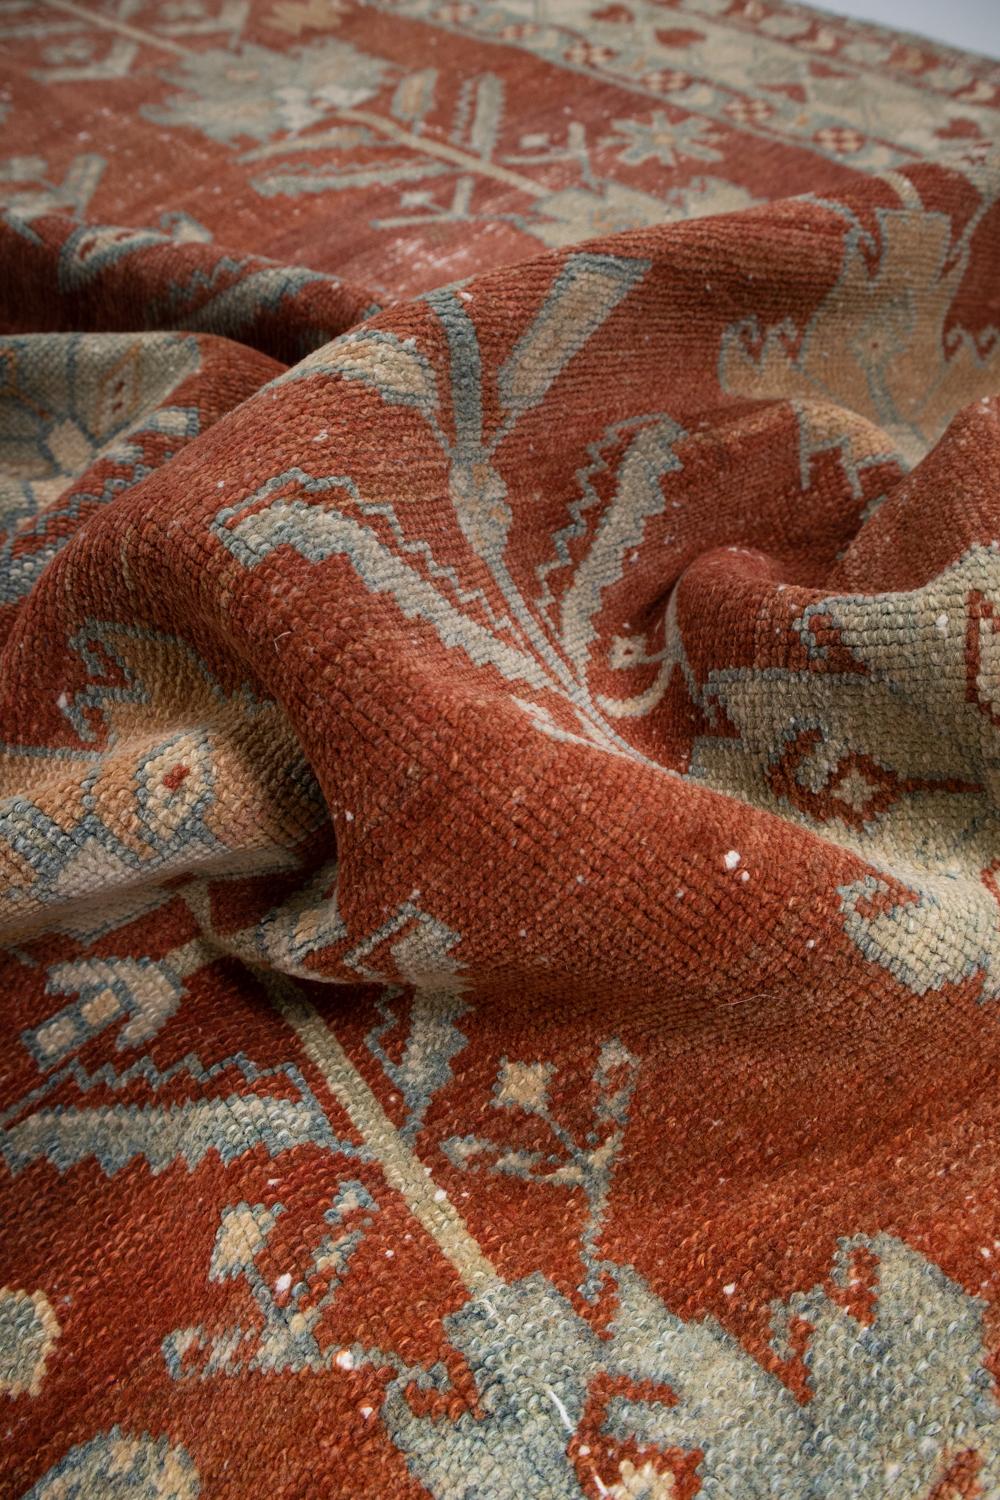 Age: 1920

Colors: tomato, light blue, tan

Pile: low

Wear Notes: 1

Material: wool on cotton

One of our favorite runners, this stand out Malayer features a spectacular rich tomato filed and a contrasting design in blue and tan. Upon close